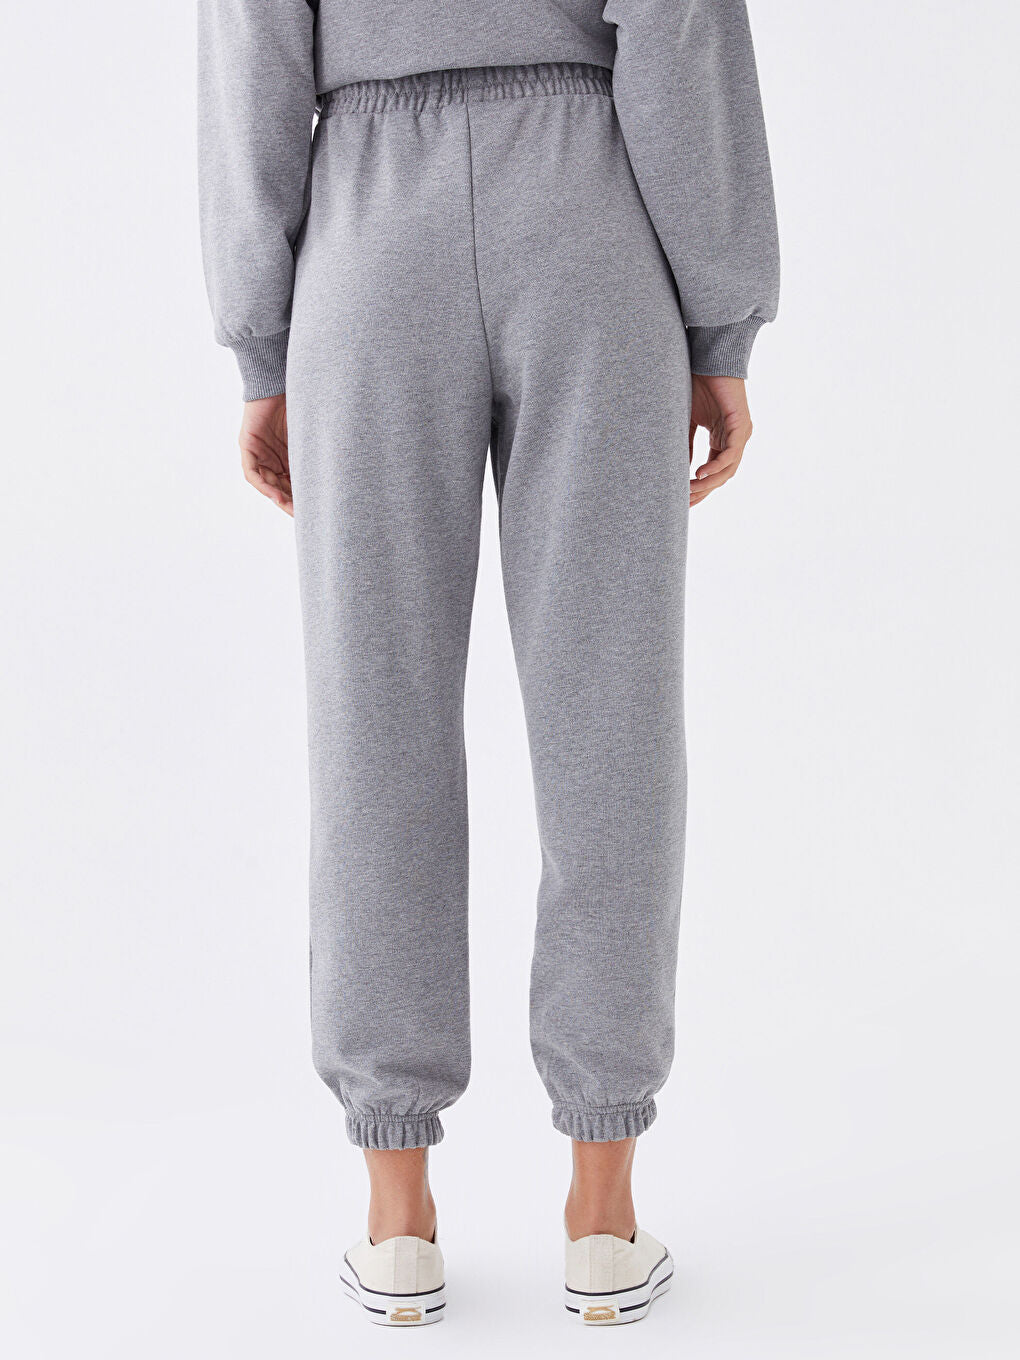 Embroidered Women Sweatpants With Elastic Waistband